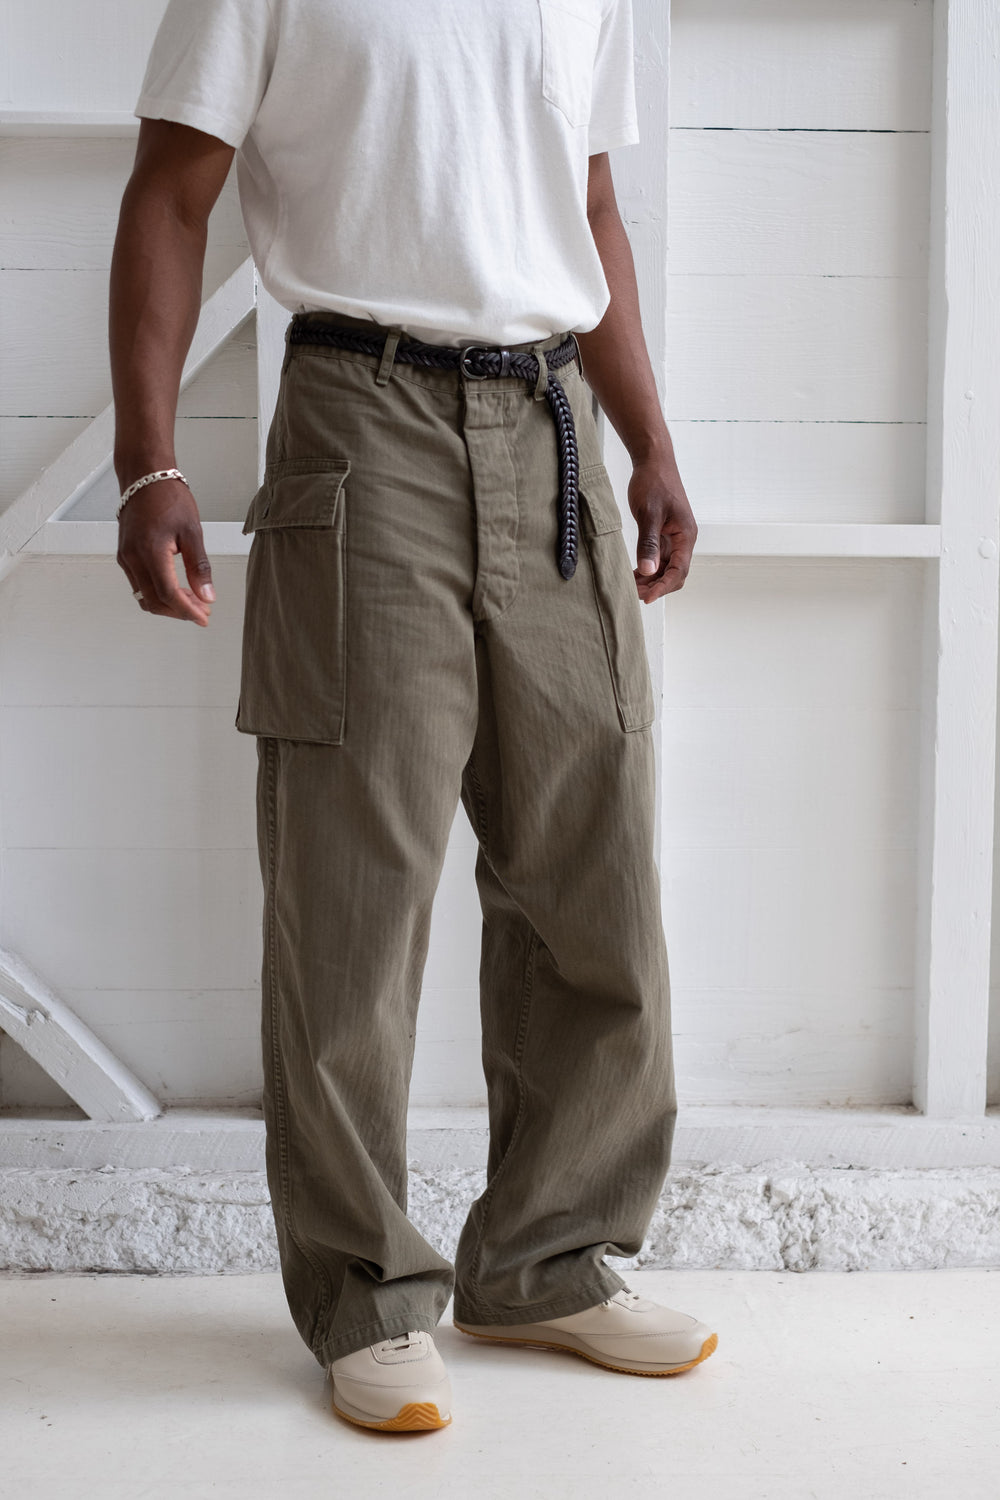 US Army 2 Pocket Cargo Pant In Army Green